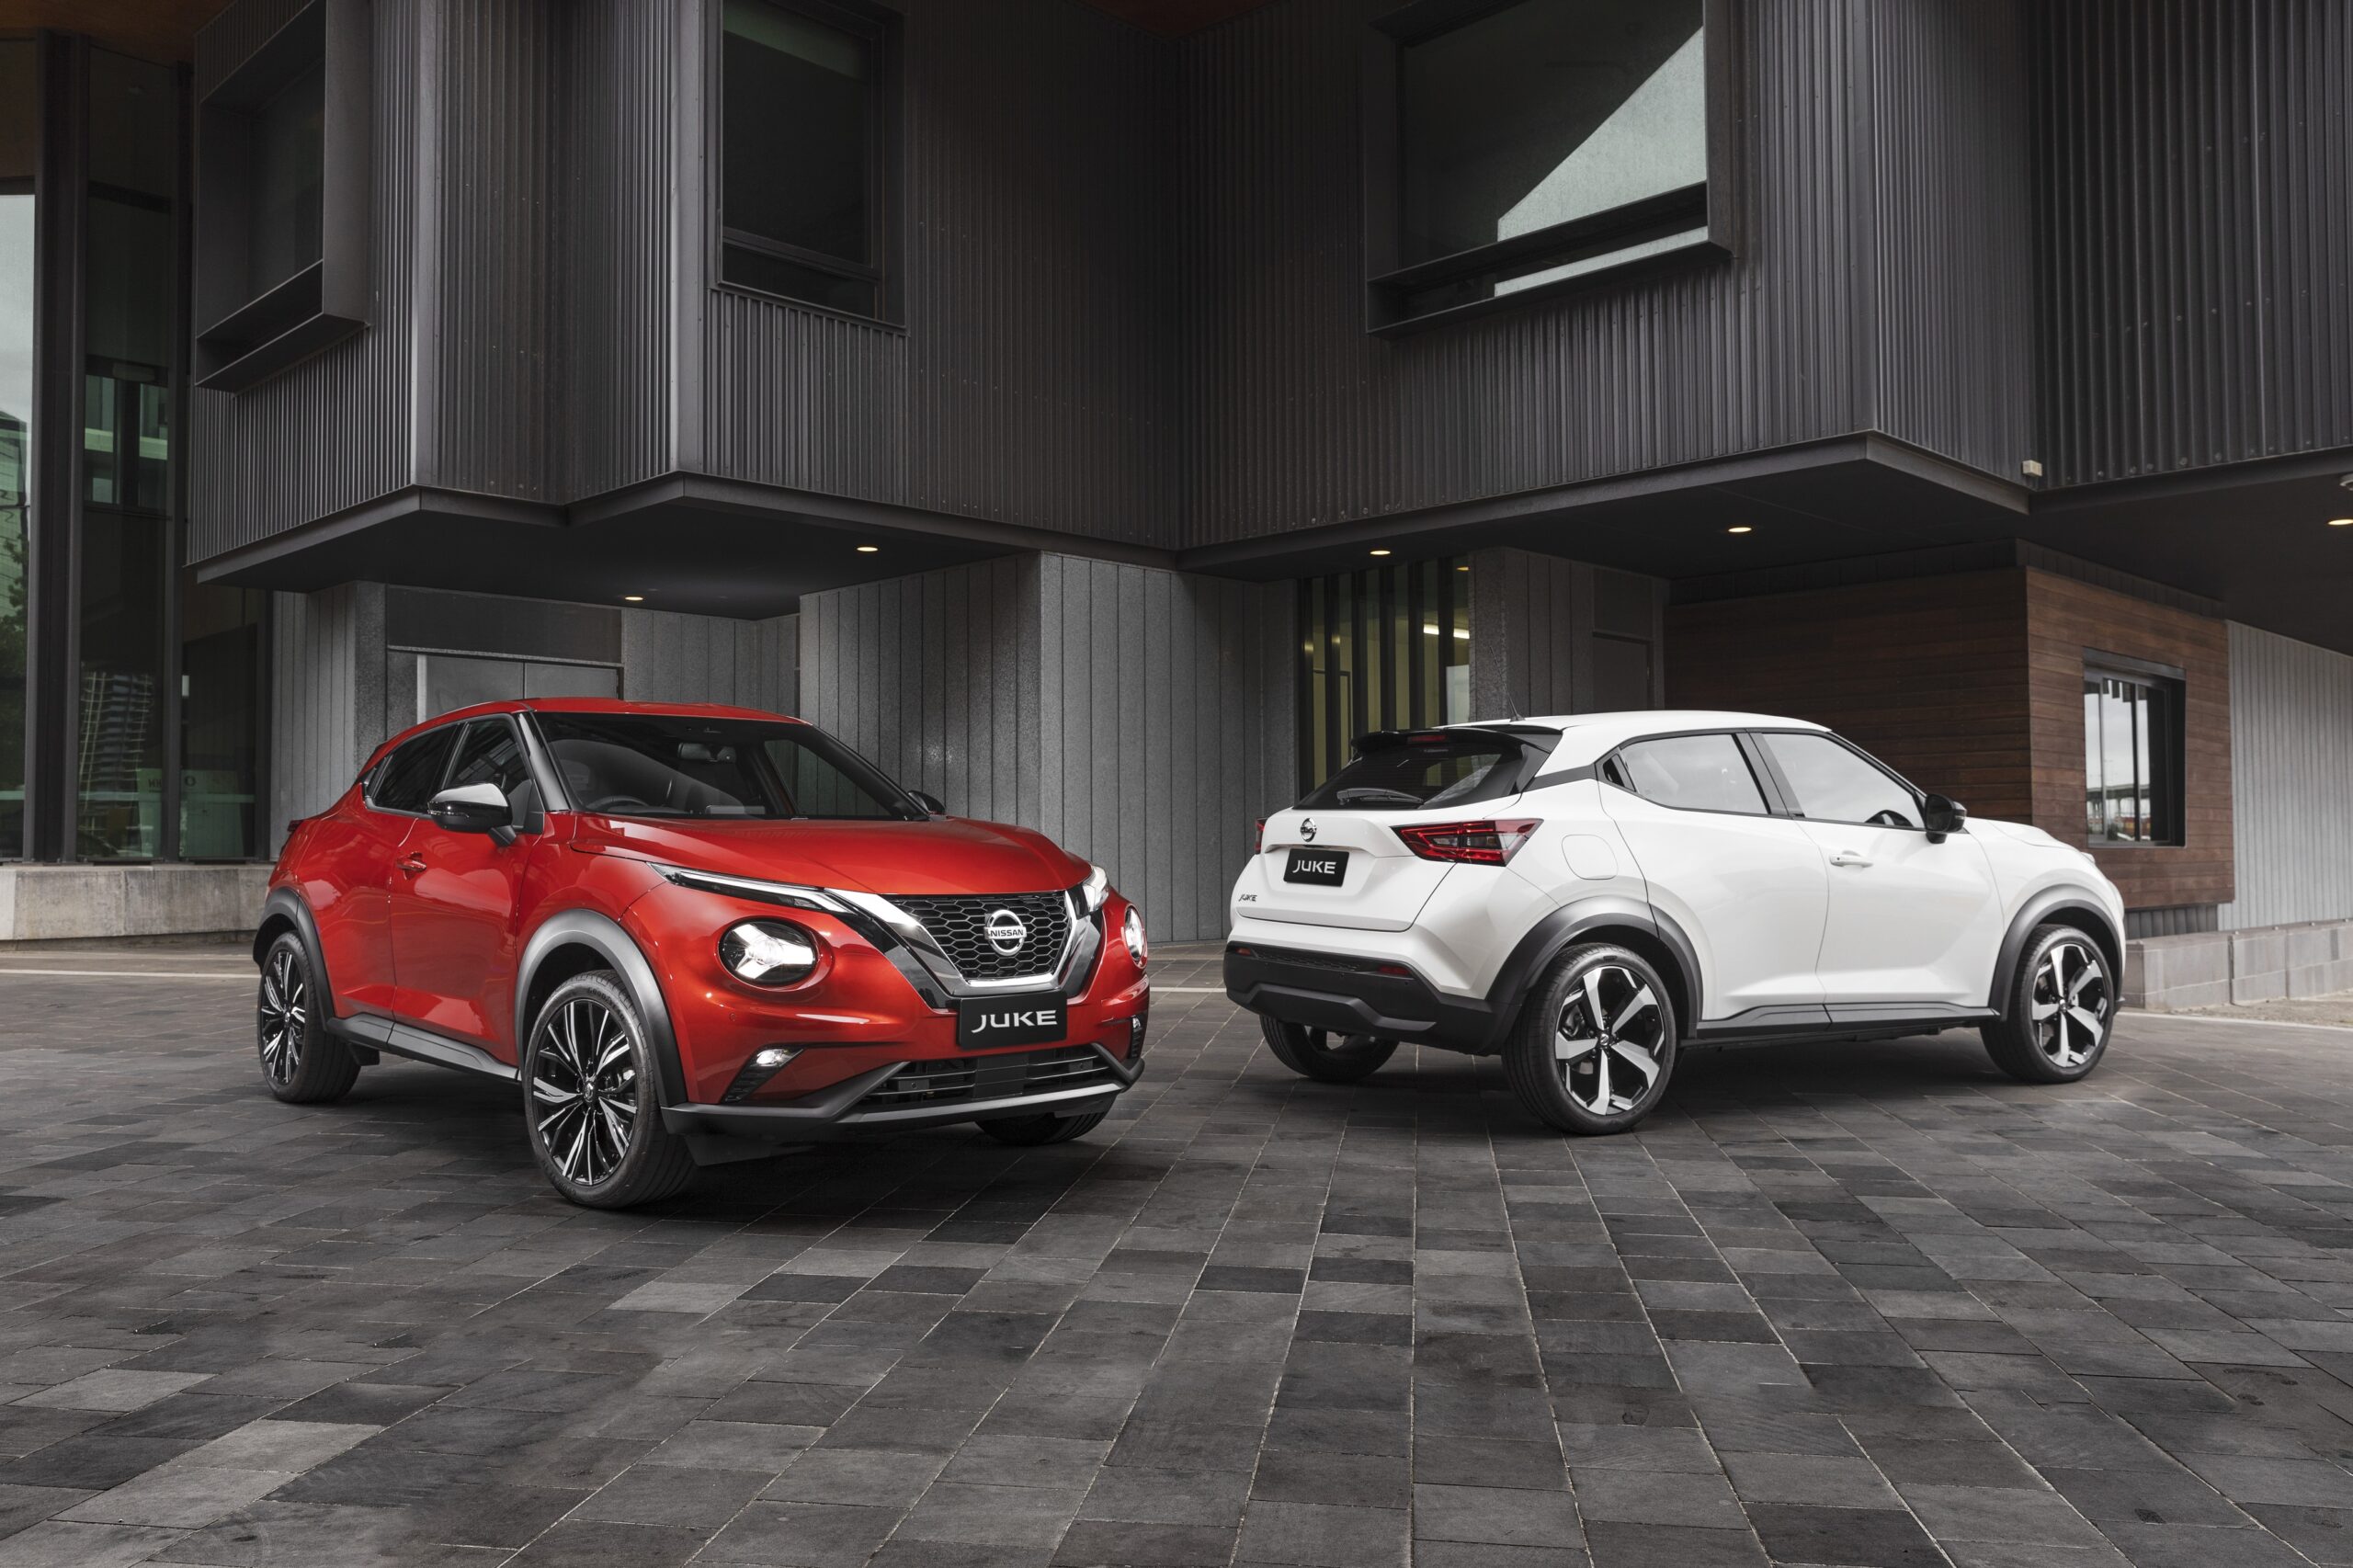 Can the Nissan JUKE stand out in the crowded SUV space?